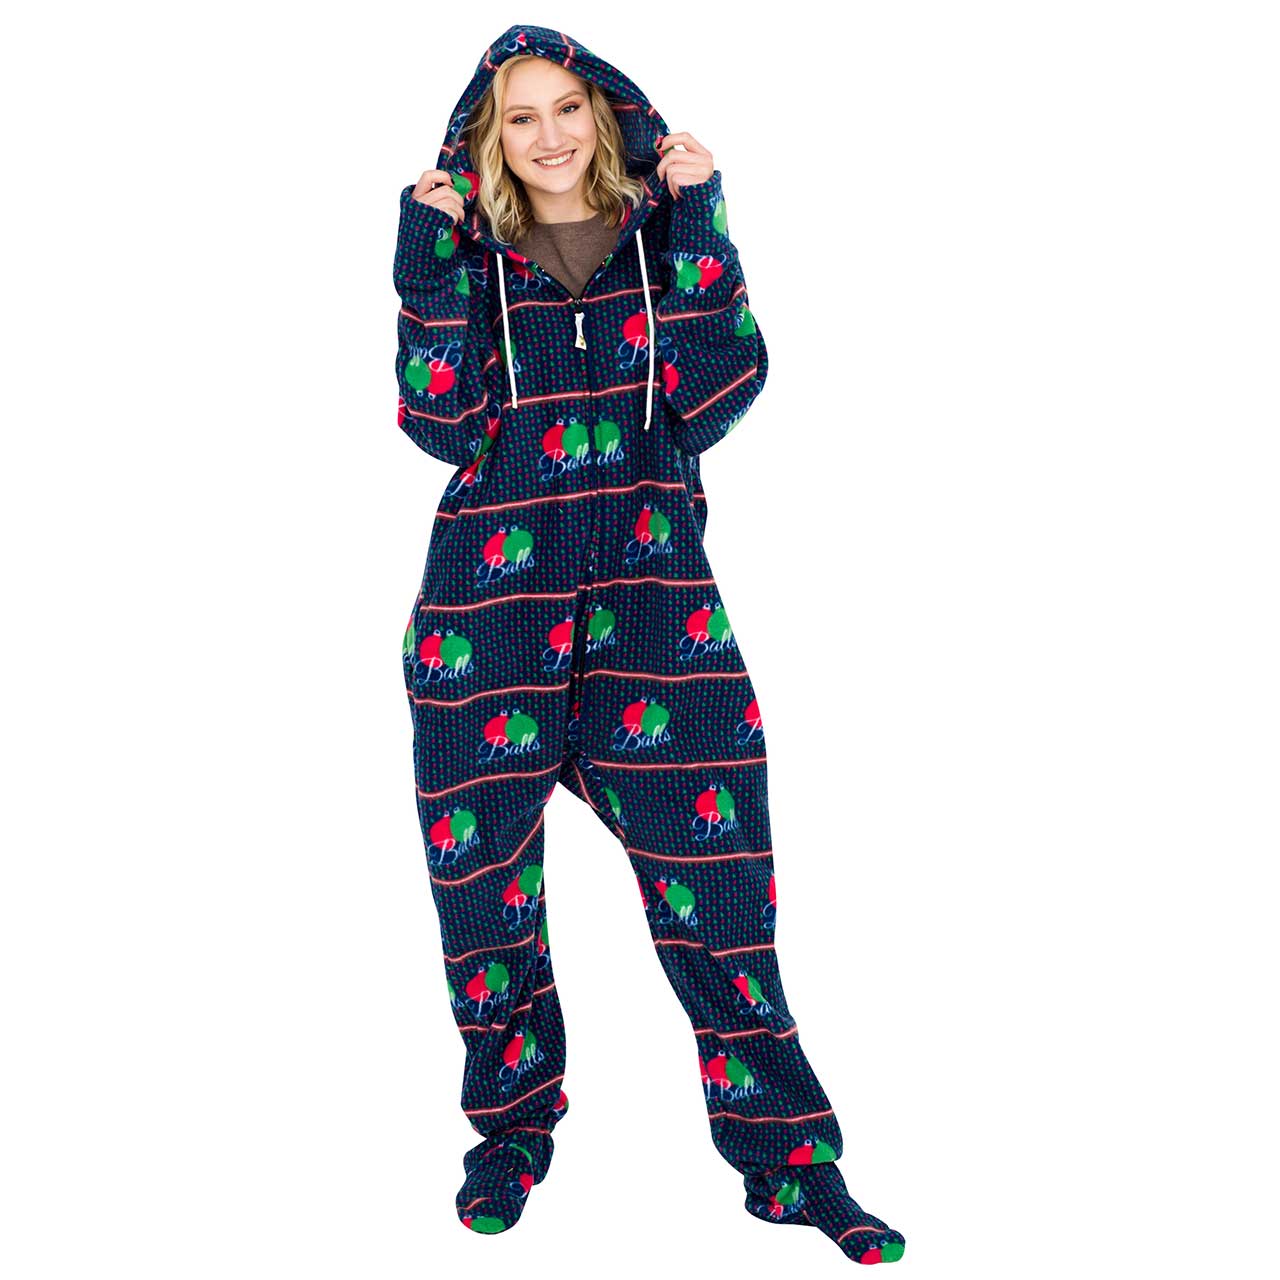 Balls Ugly Christmas Lazy Black Pajama Suit with Hood,Specials : uglyschristmassweater.com